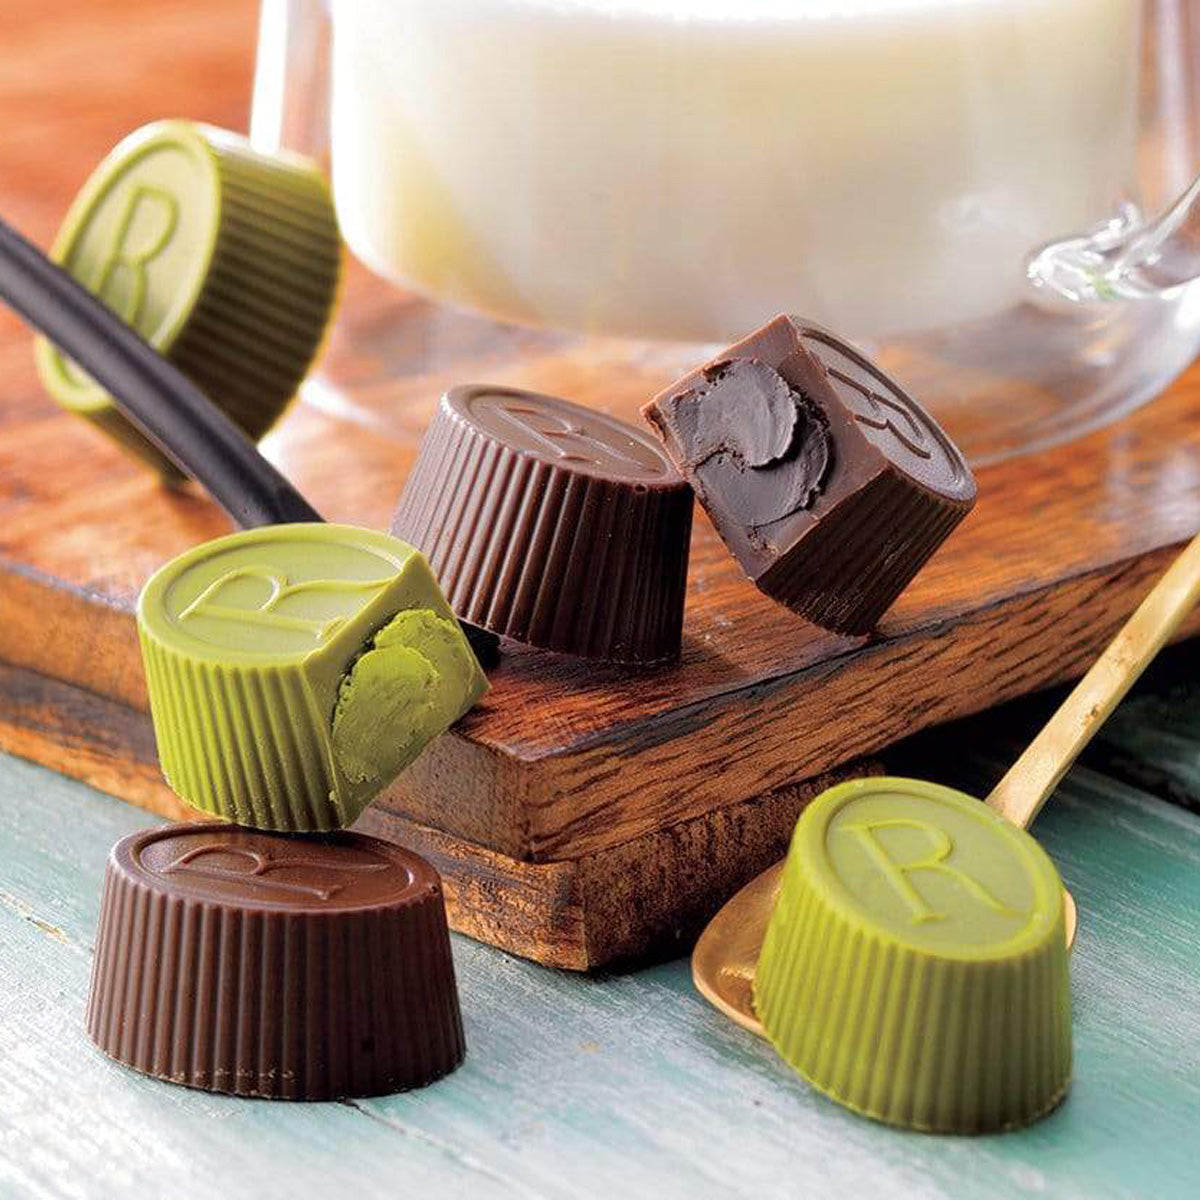 ROYCE' Chocolate - Tea Chocolat "Hojicha & Matcha" - Image shows brown and green chocolate cups engraved with the letter R. Accents include brown wooden trays and spoons. Background features a glass of milk and a wooden surface in color blue.